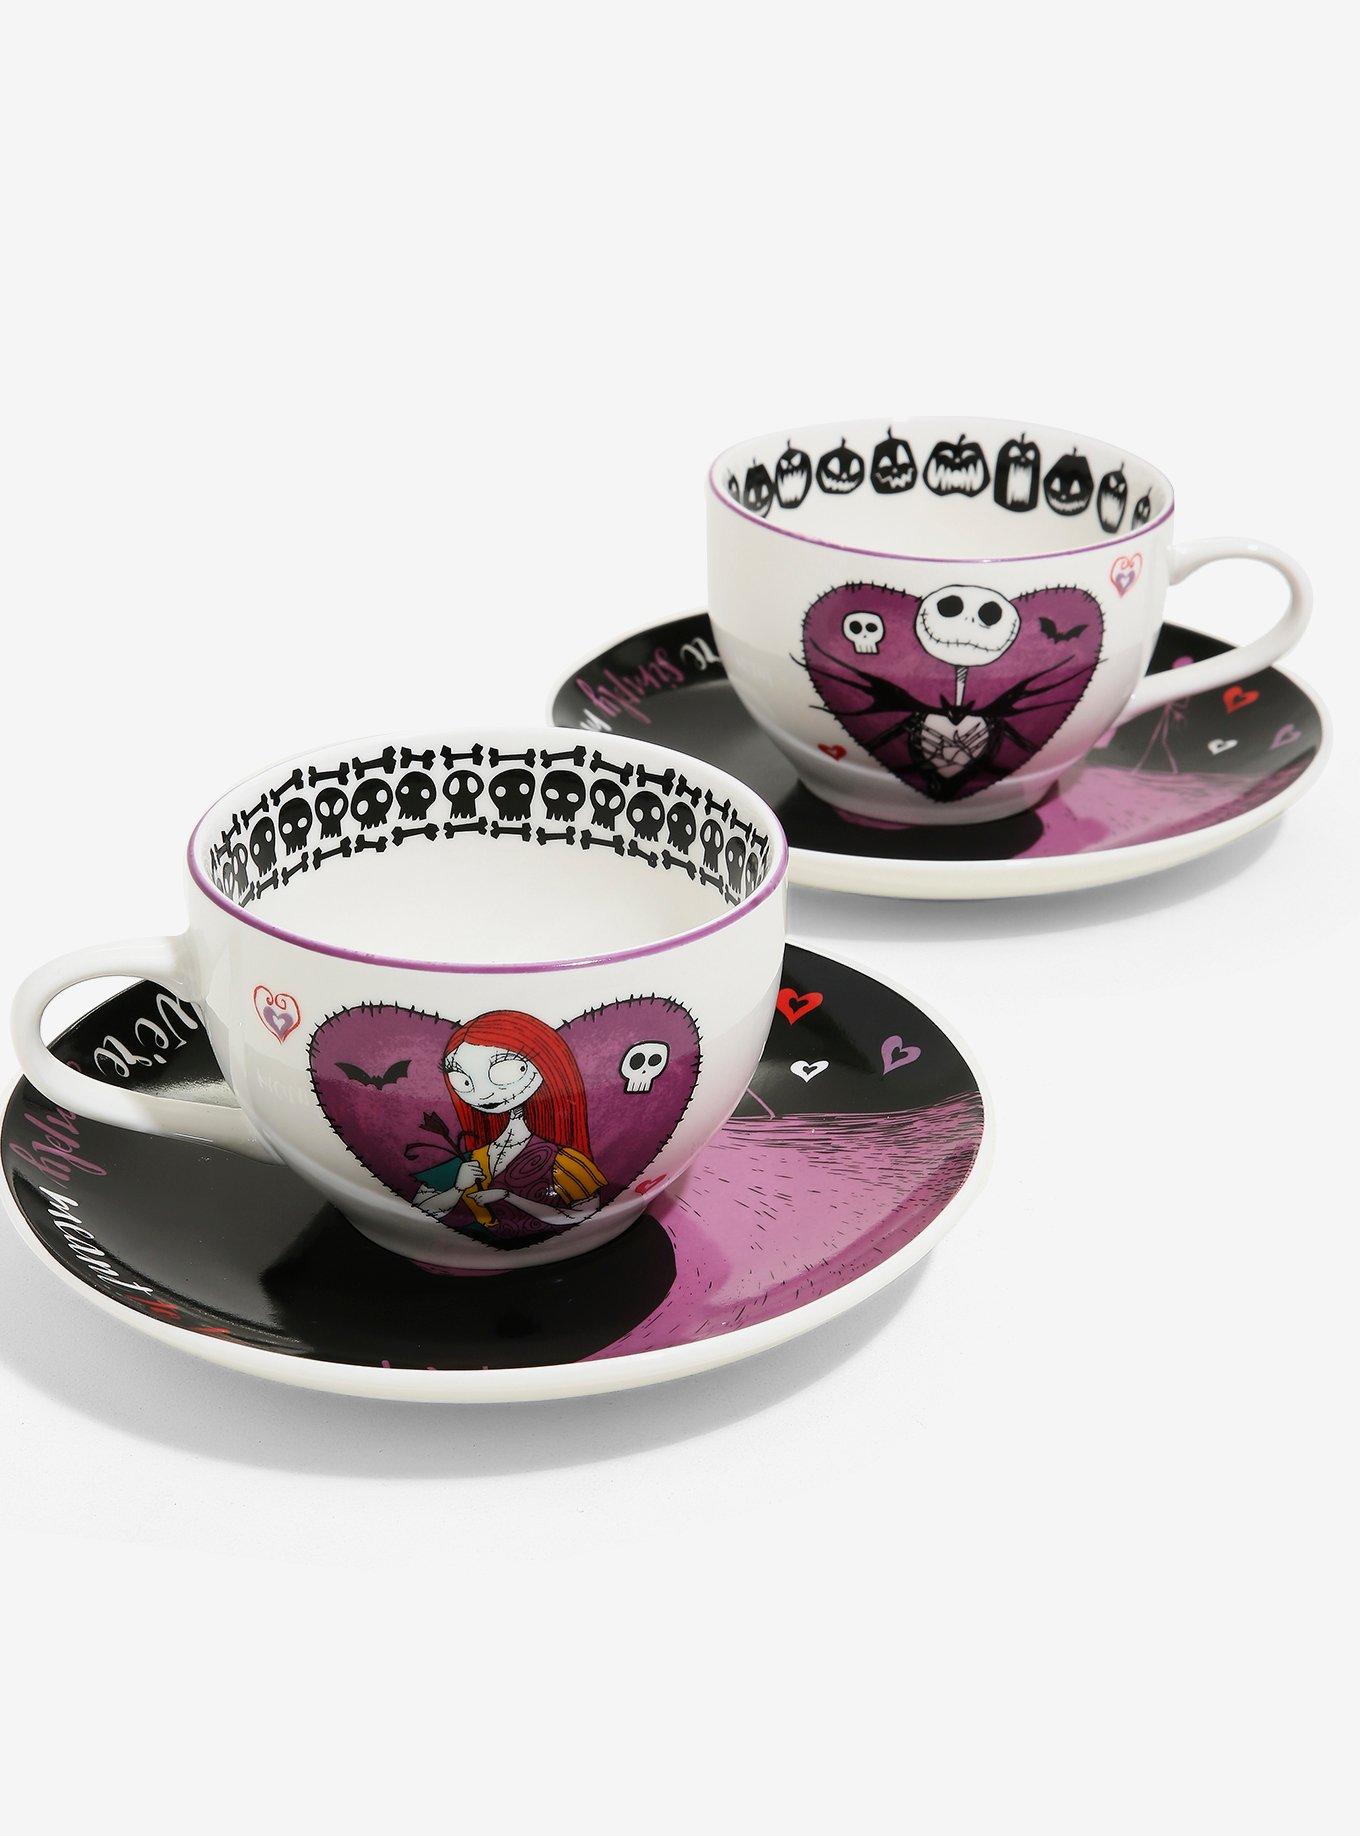 PIN SALLY ON TEACUPS NIGHTMARE BEFORE CHRISTMAS 3 INCH JUMBO FANTASY LIMITED LE 